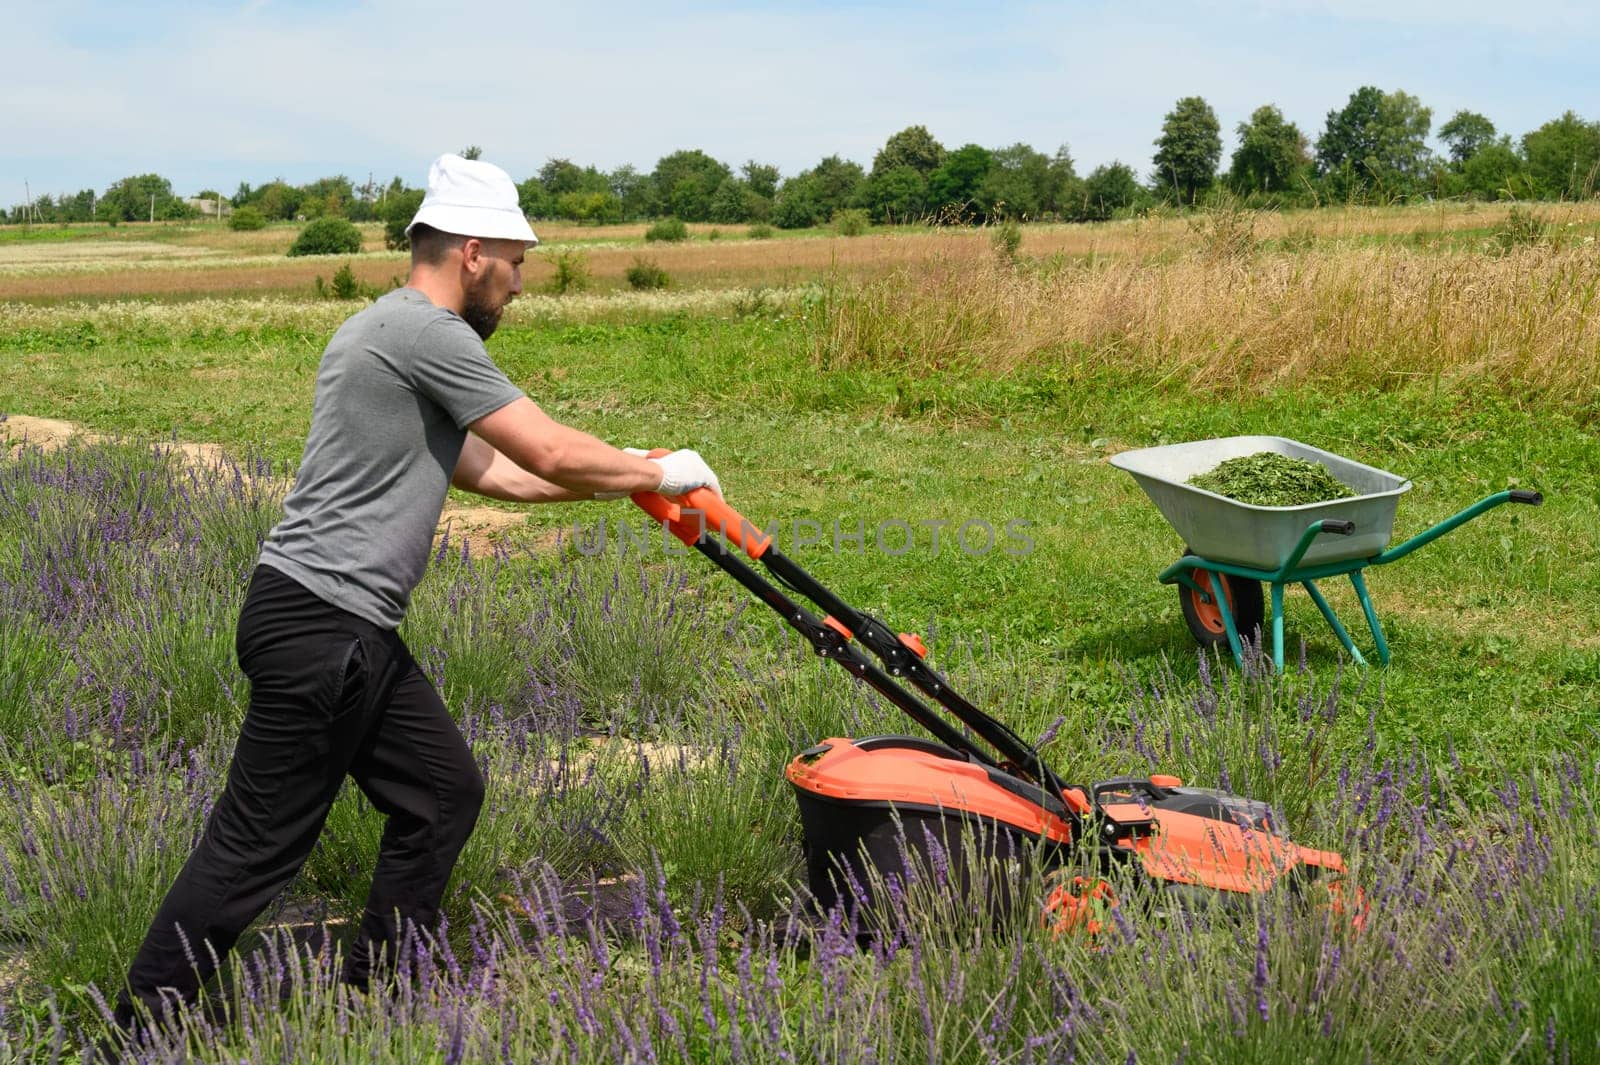 A man mows the grass with an electric lawnmower, mowing the grass between the lavender bushes.